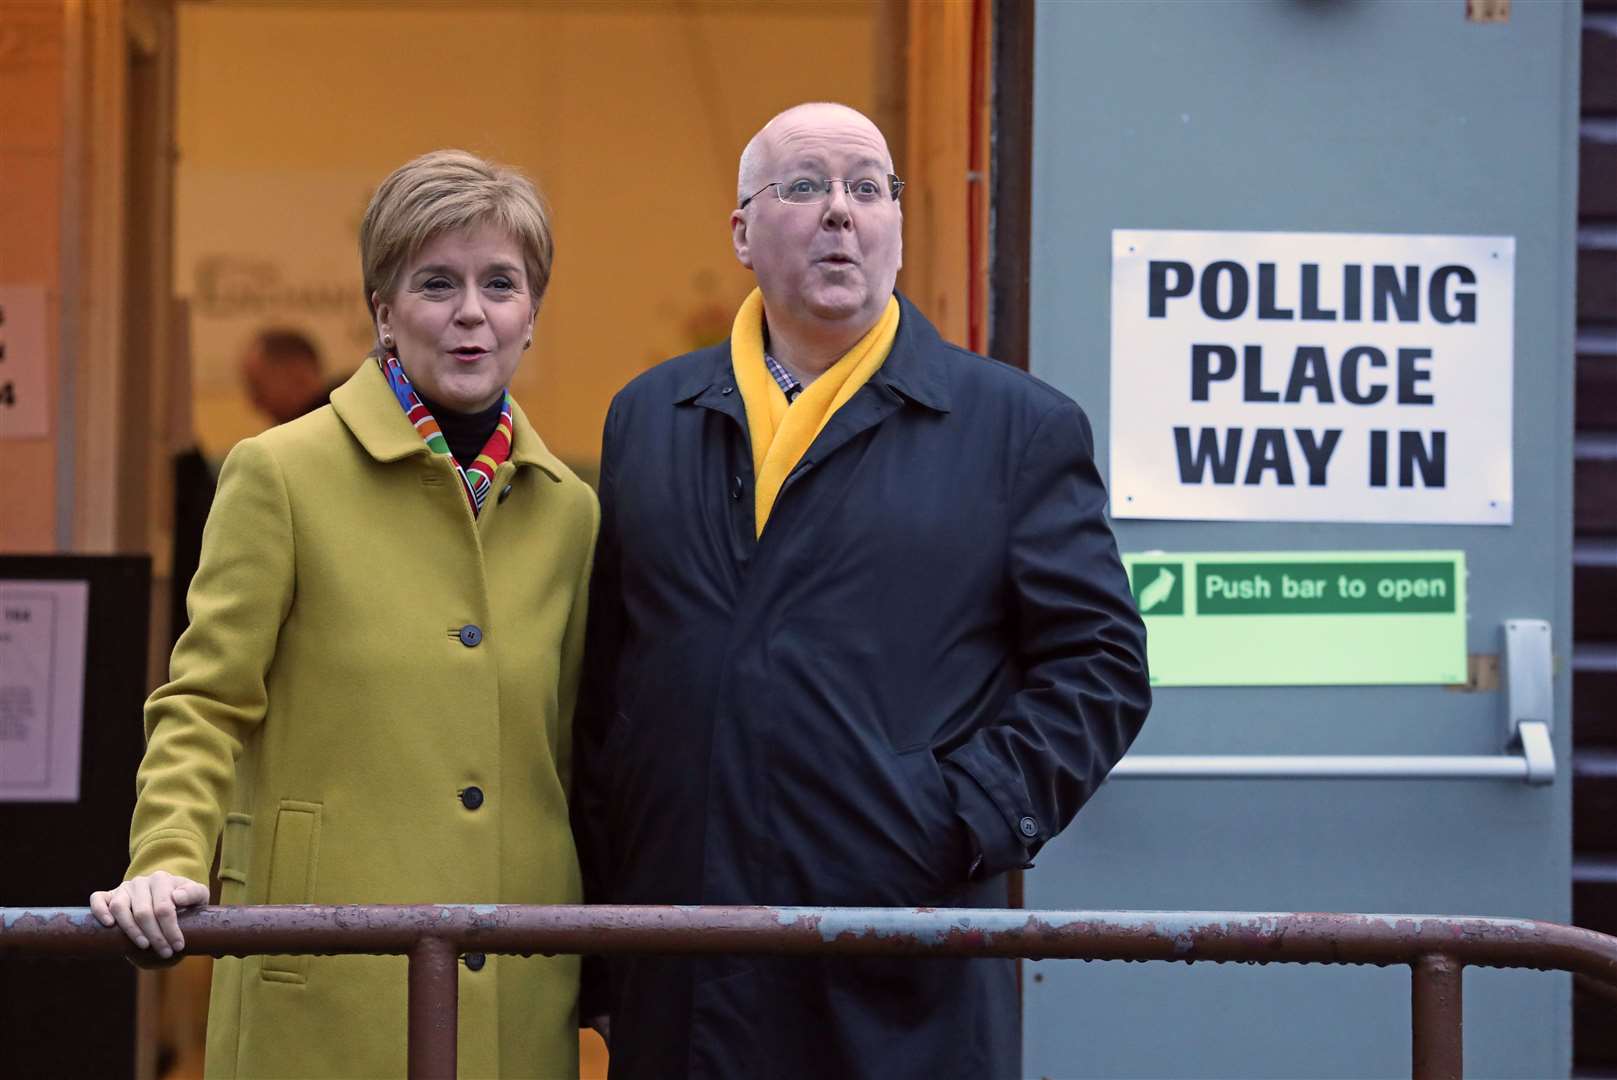 Peter Murrell, who is married to Nicola Sturgeon, quit his role as SNP chief executive during the leadership campaign (Andrew Milligan/PA)